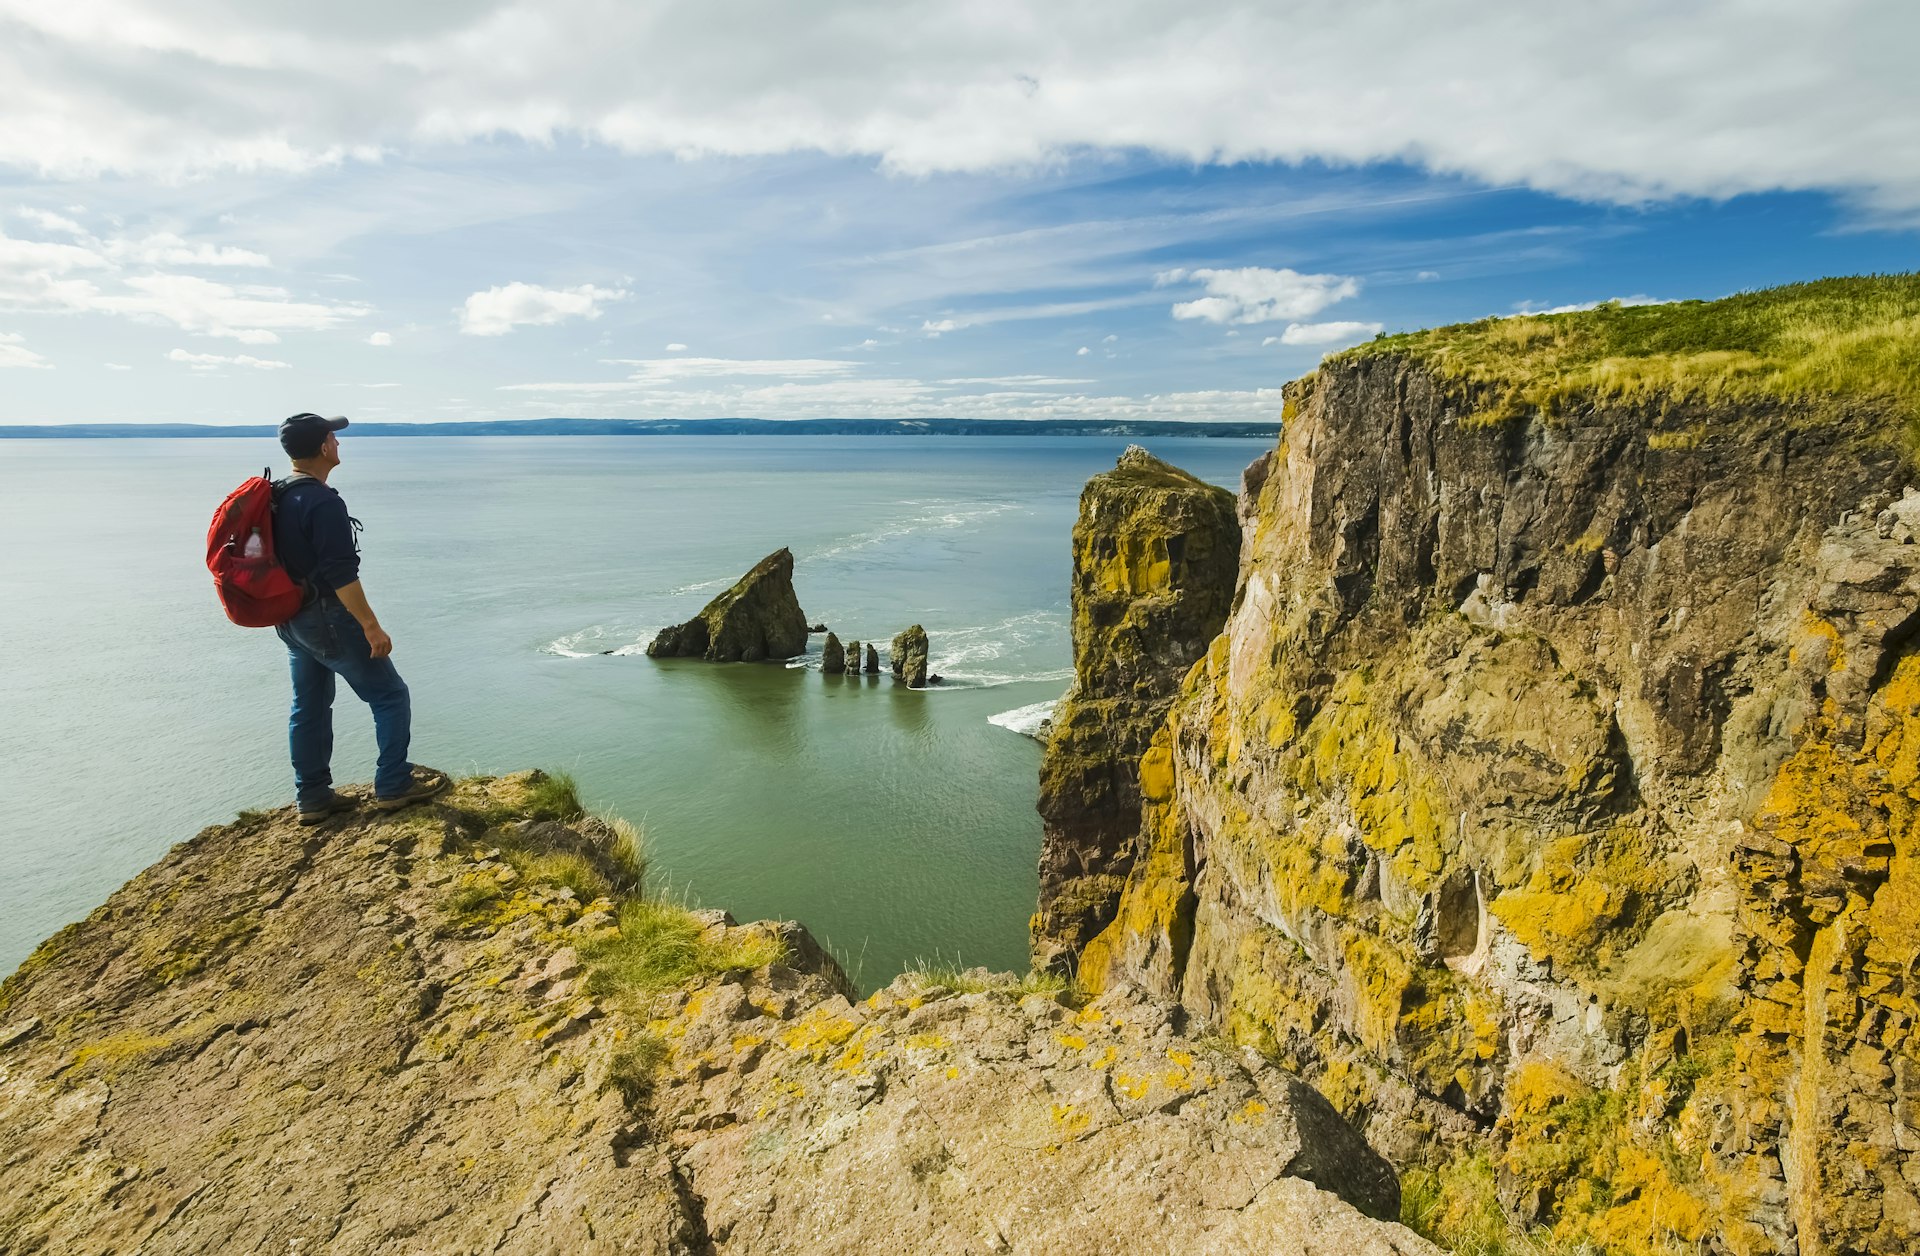 A hiker looks out over the Bay of Fundy from Cape Split, Nova Scotia, Canada